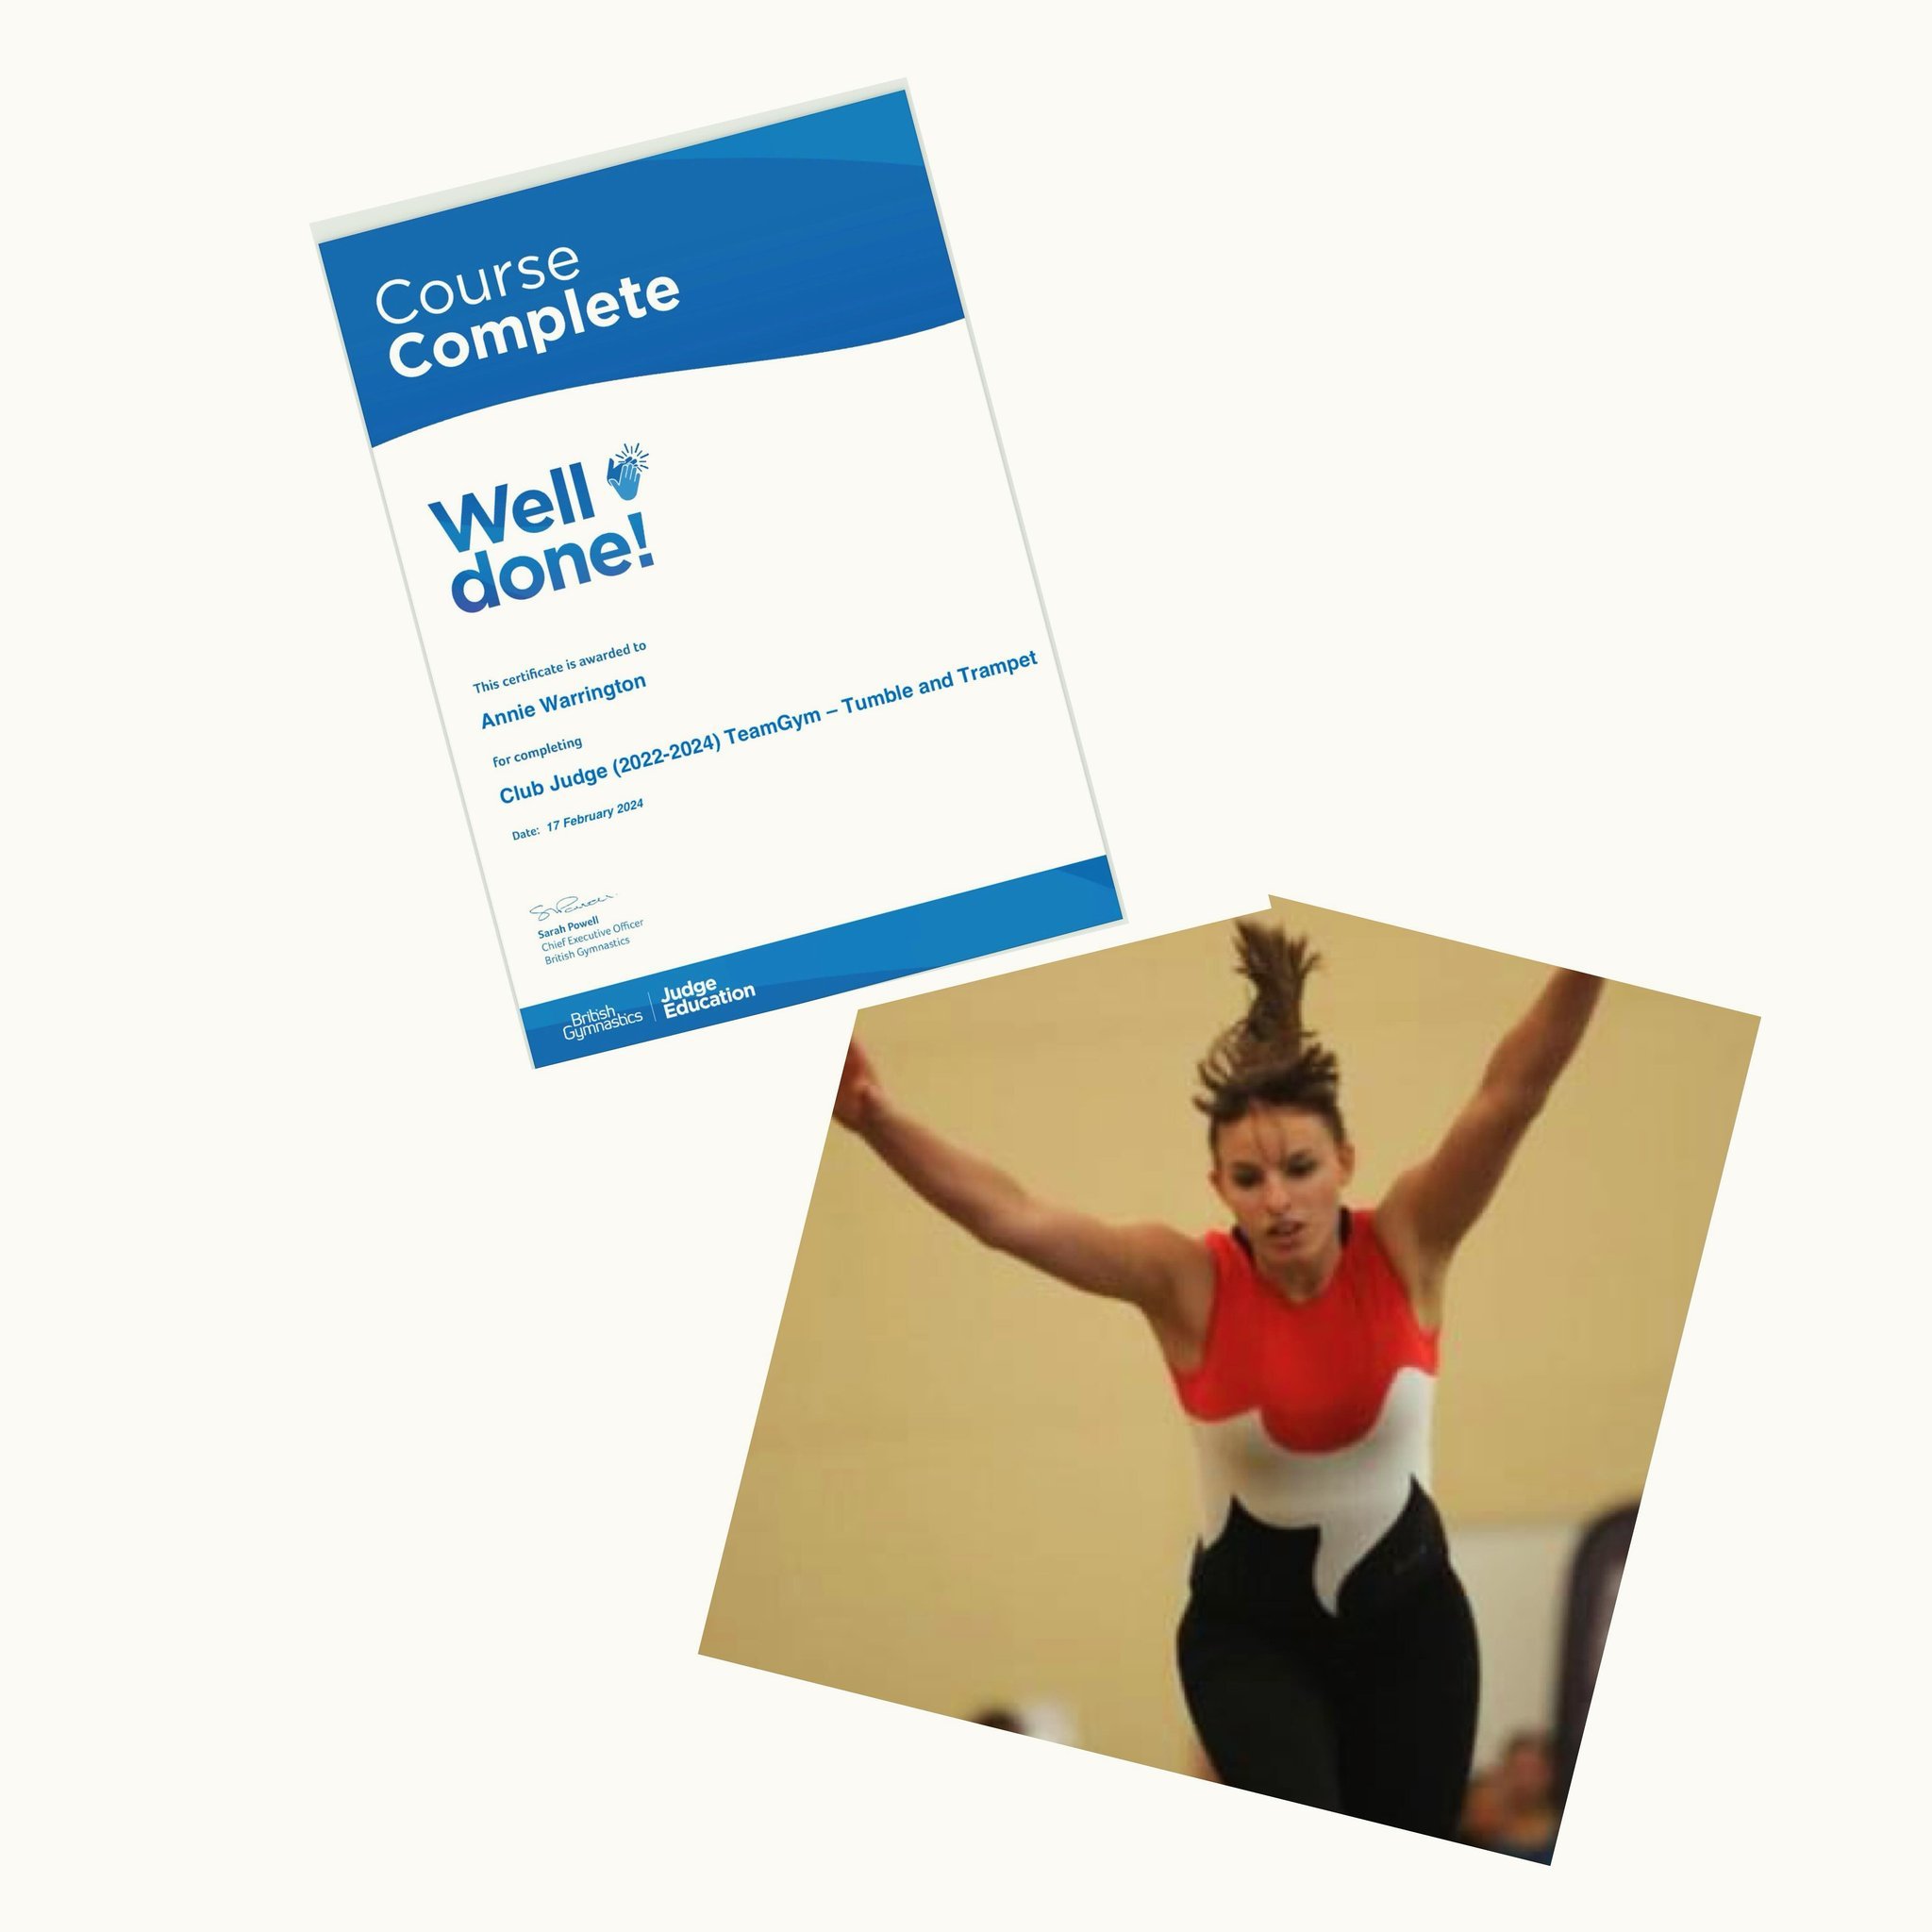 Congratulations 🥳 to former TeamGym National Champion (2009) and L2 TG Coach Annie Warrington on passing the new BG Tumble &amp; Trampet Club Judge Course. Annie has been focusing on her nursing 🧑&zwj;⚕️ career 🏥 but is now back coaching and this 